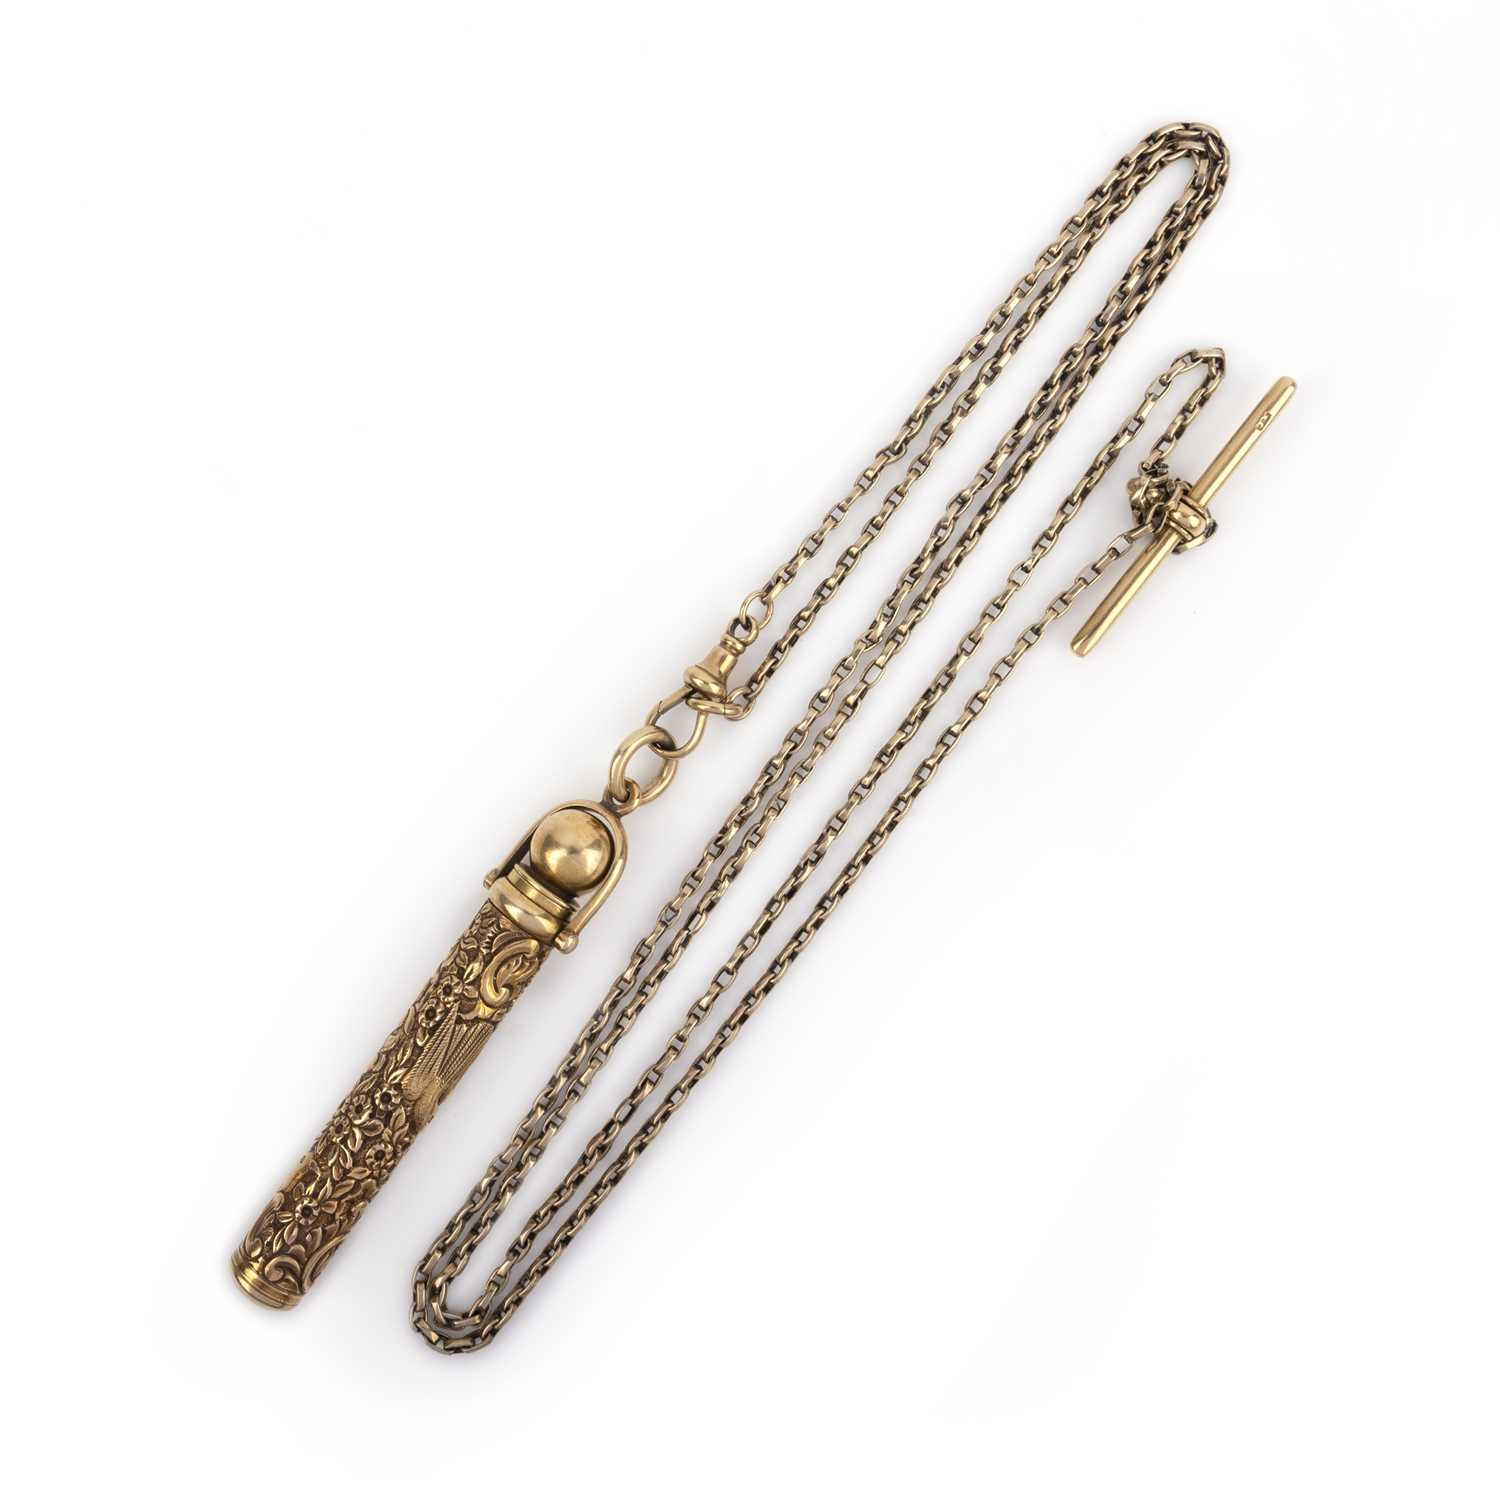 A gold long guard chain and propelling pencil, late 19th century, the gold chain of elongated